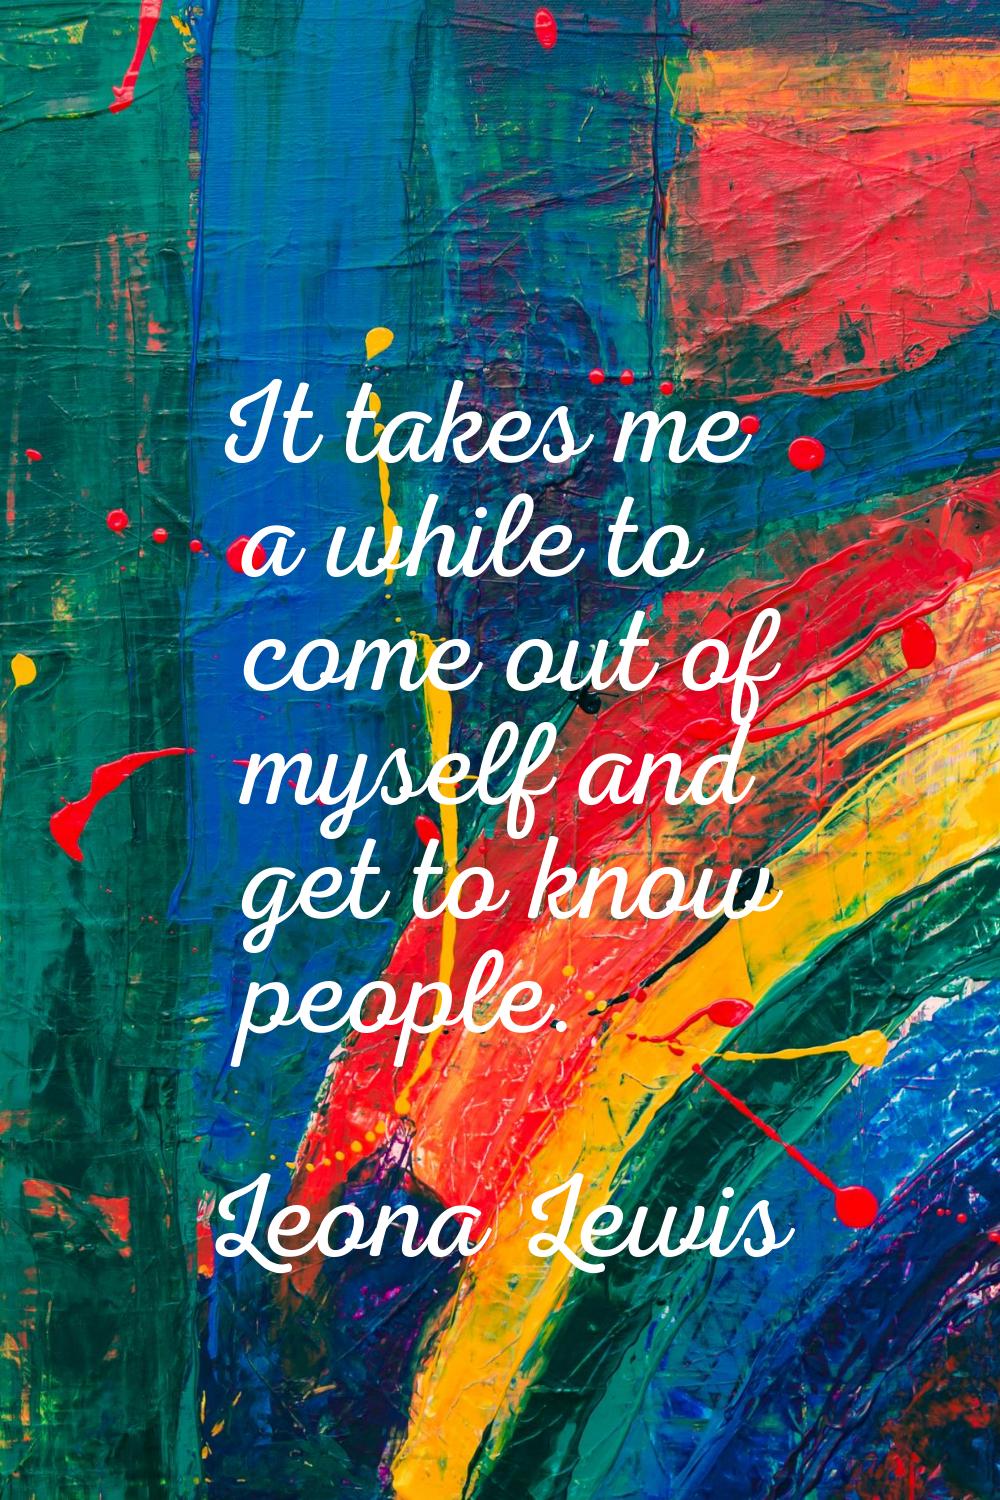 It takes me a while to come out of myself and get to know people.